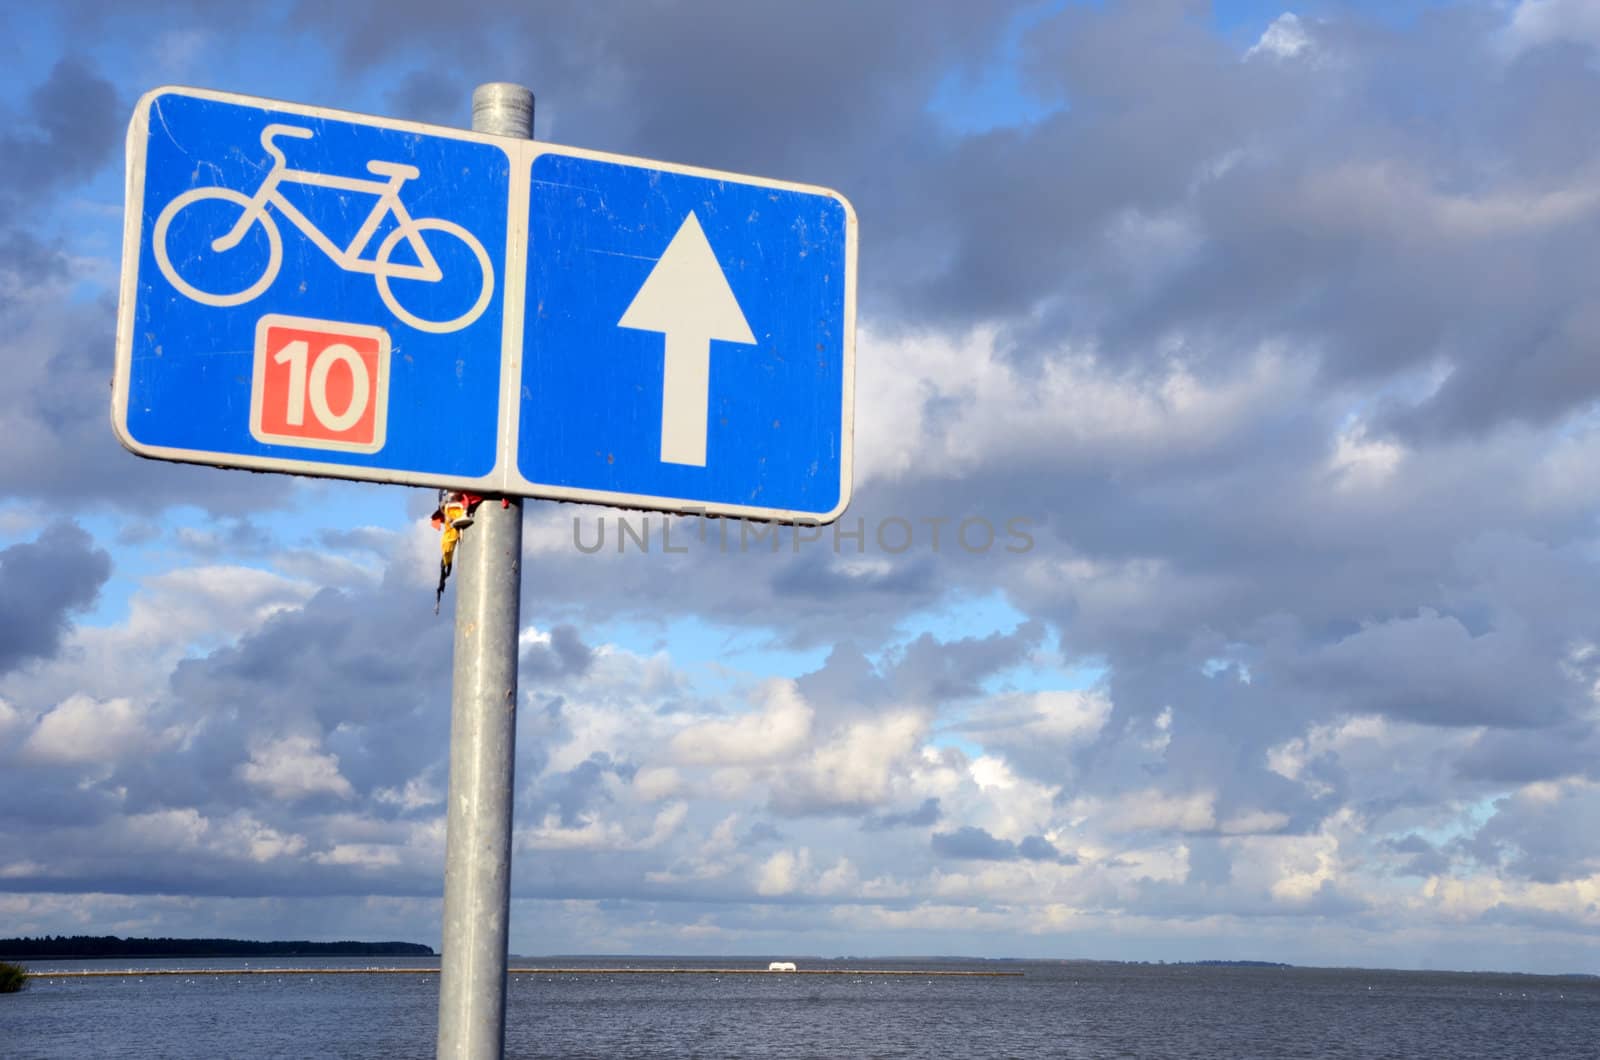 Bicycle path sign nr ten near lake and cloudy sky. by sauletas